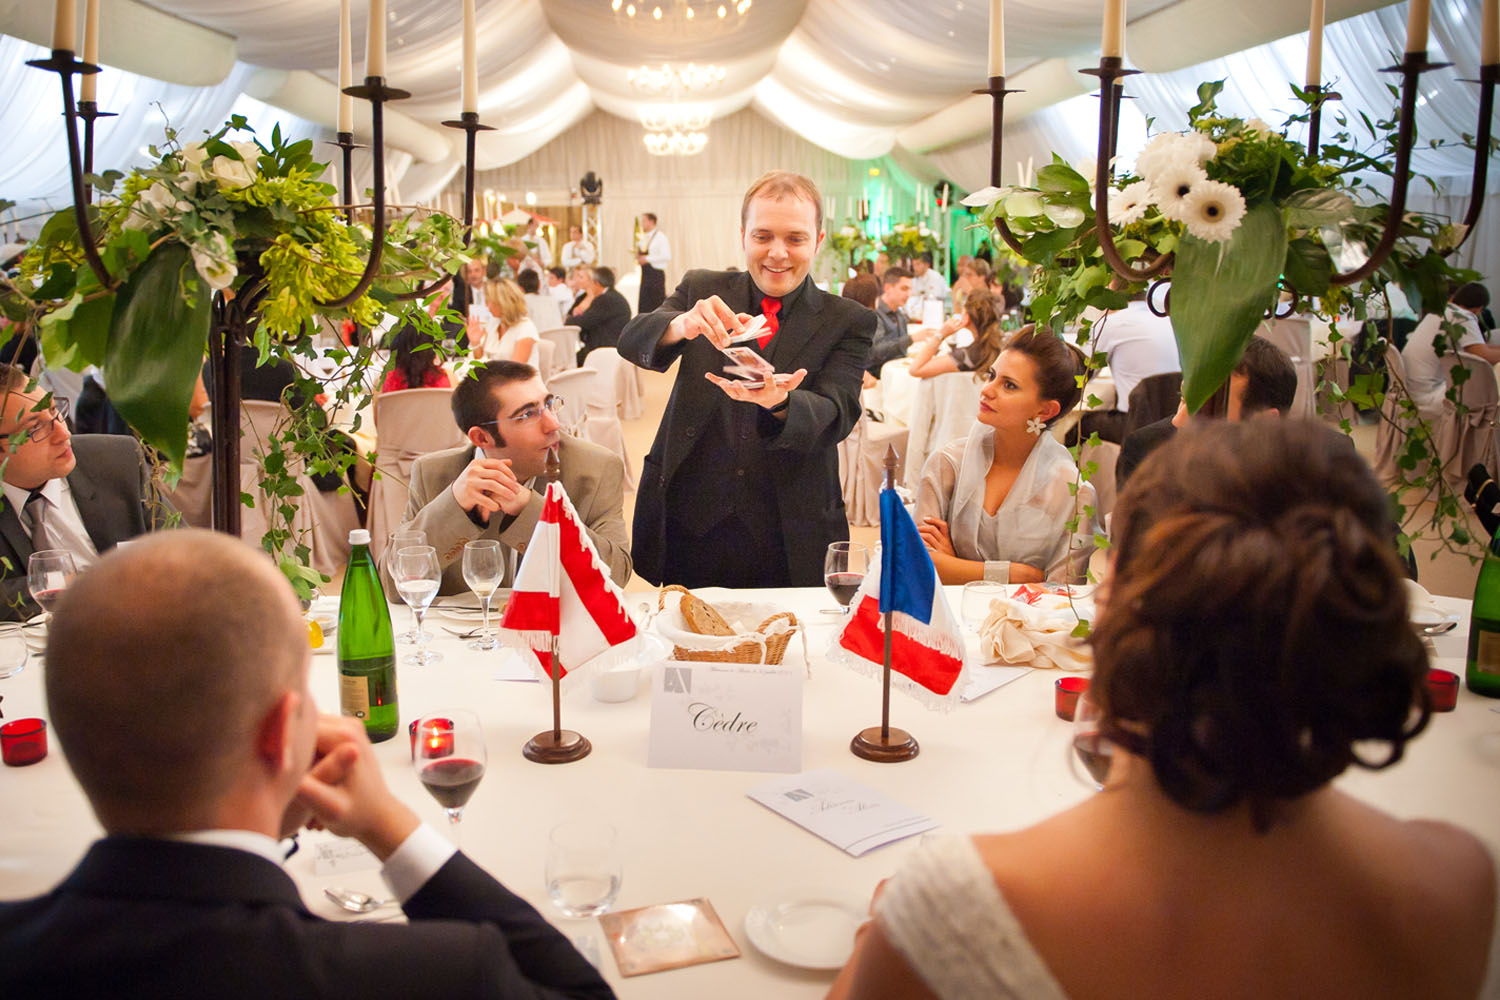 The French magician Boris Wild performing close-up magic at the table of the bride and groom during a wedding